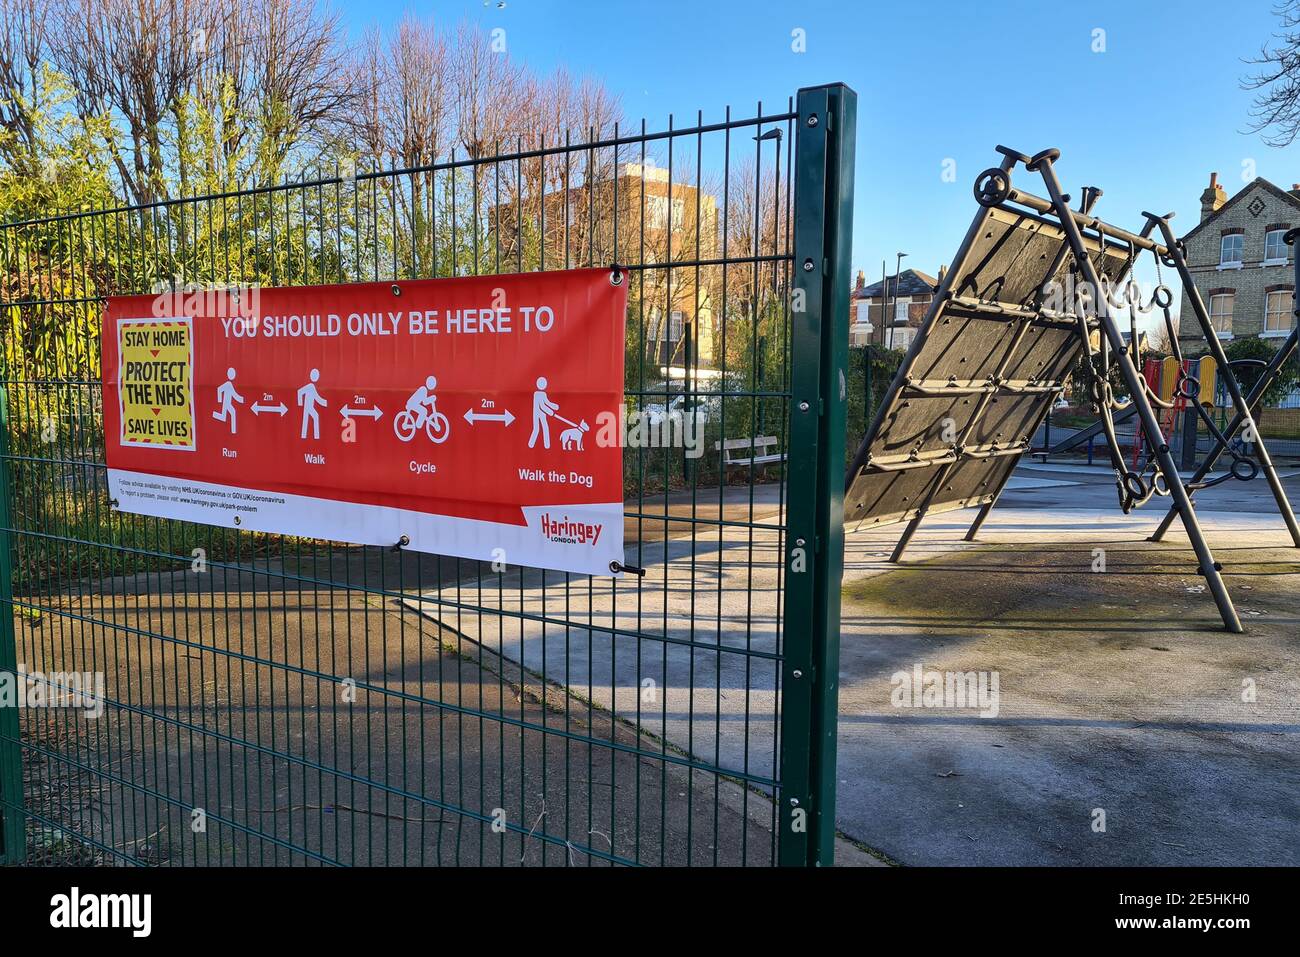 A government Covid-19 lockdown information banner in a park informing the public of outdoor exercise rules. Stock Photo